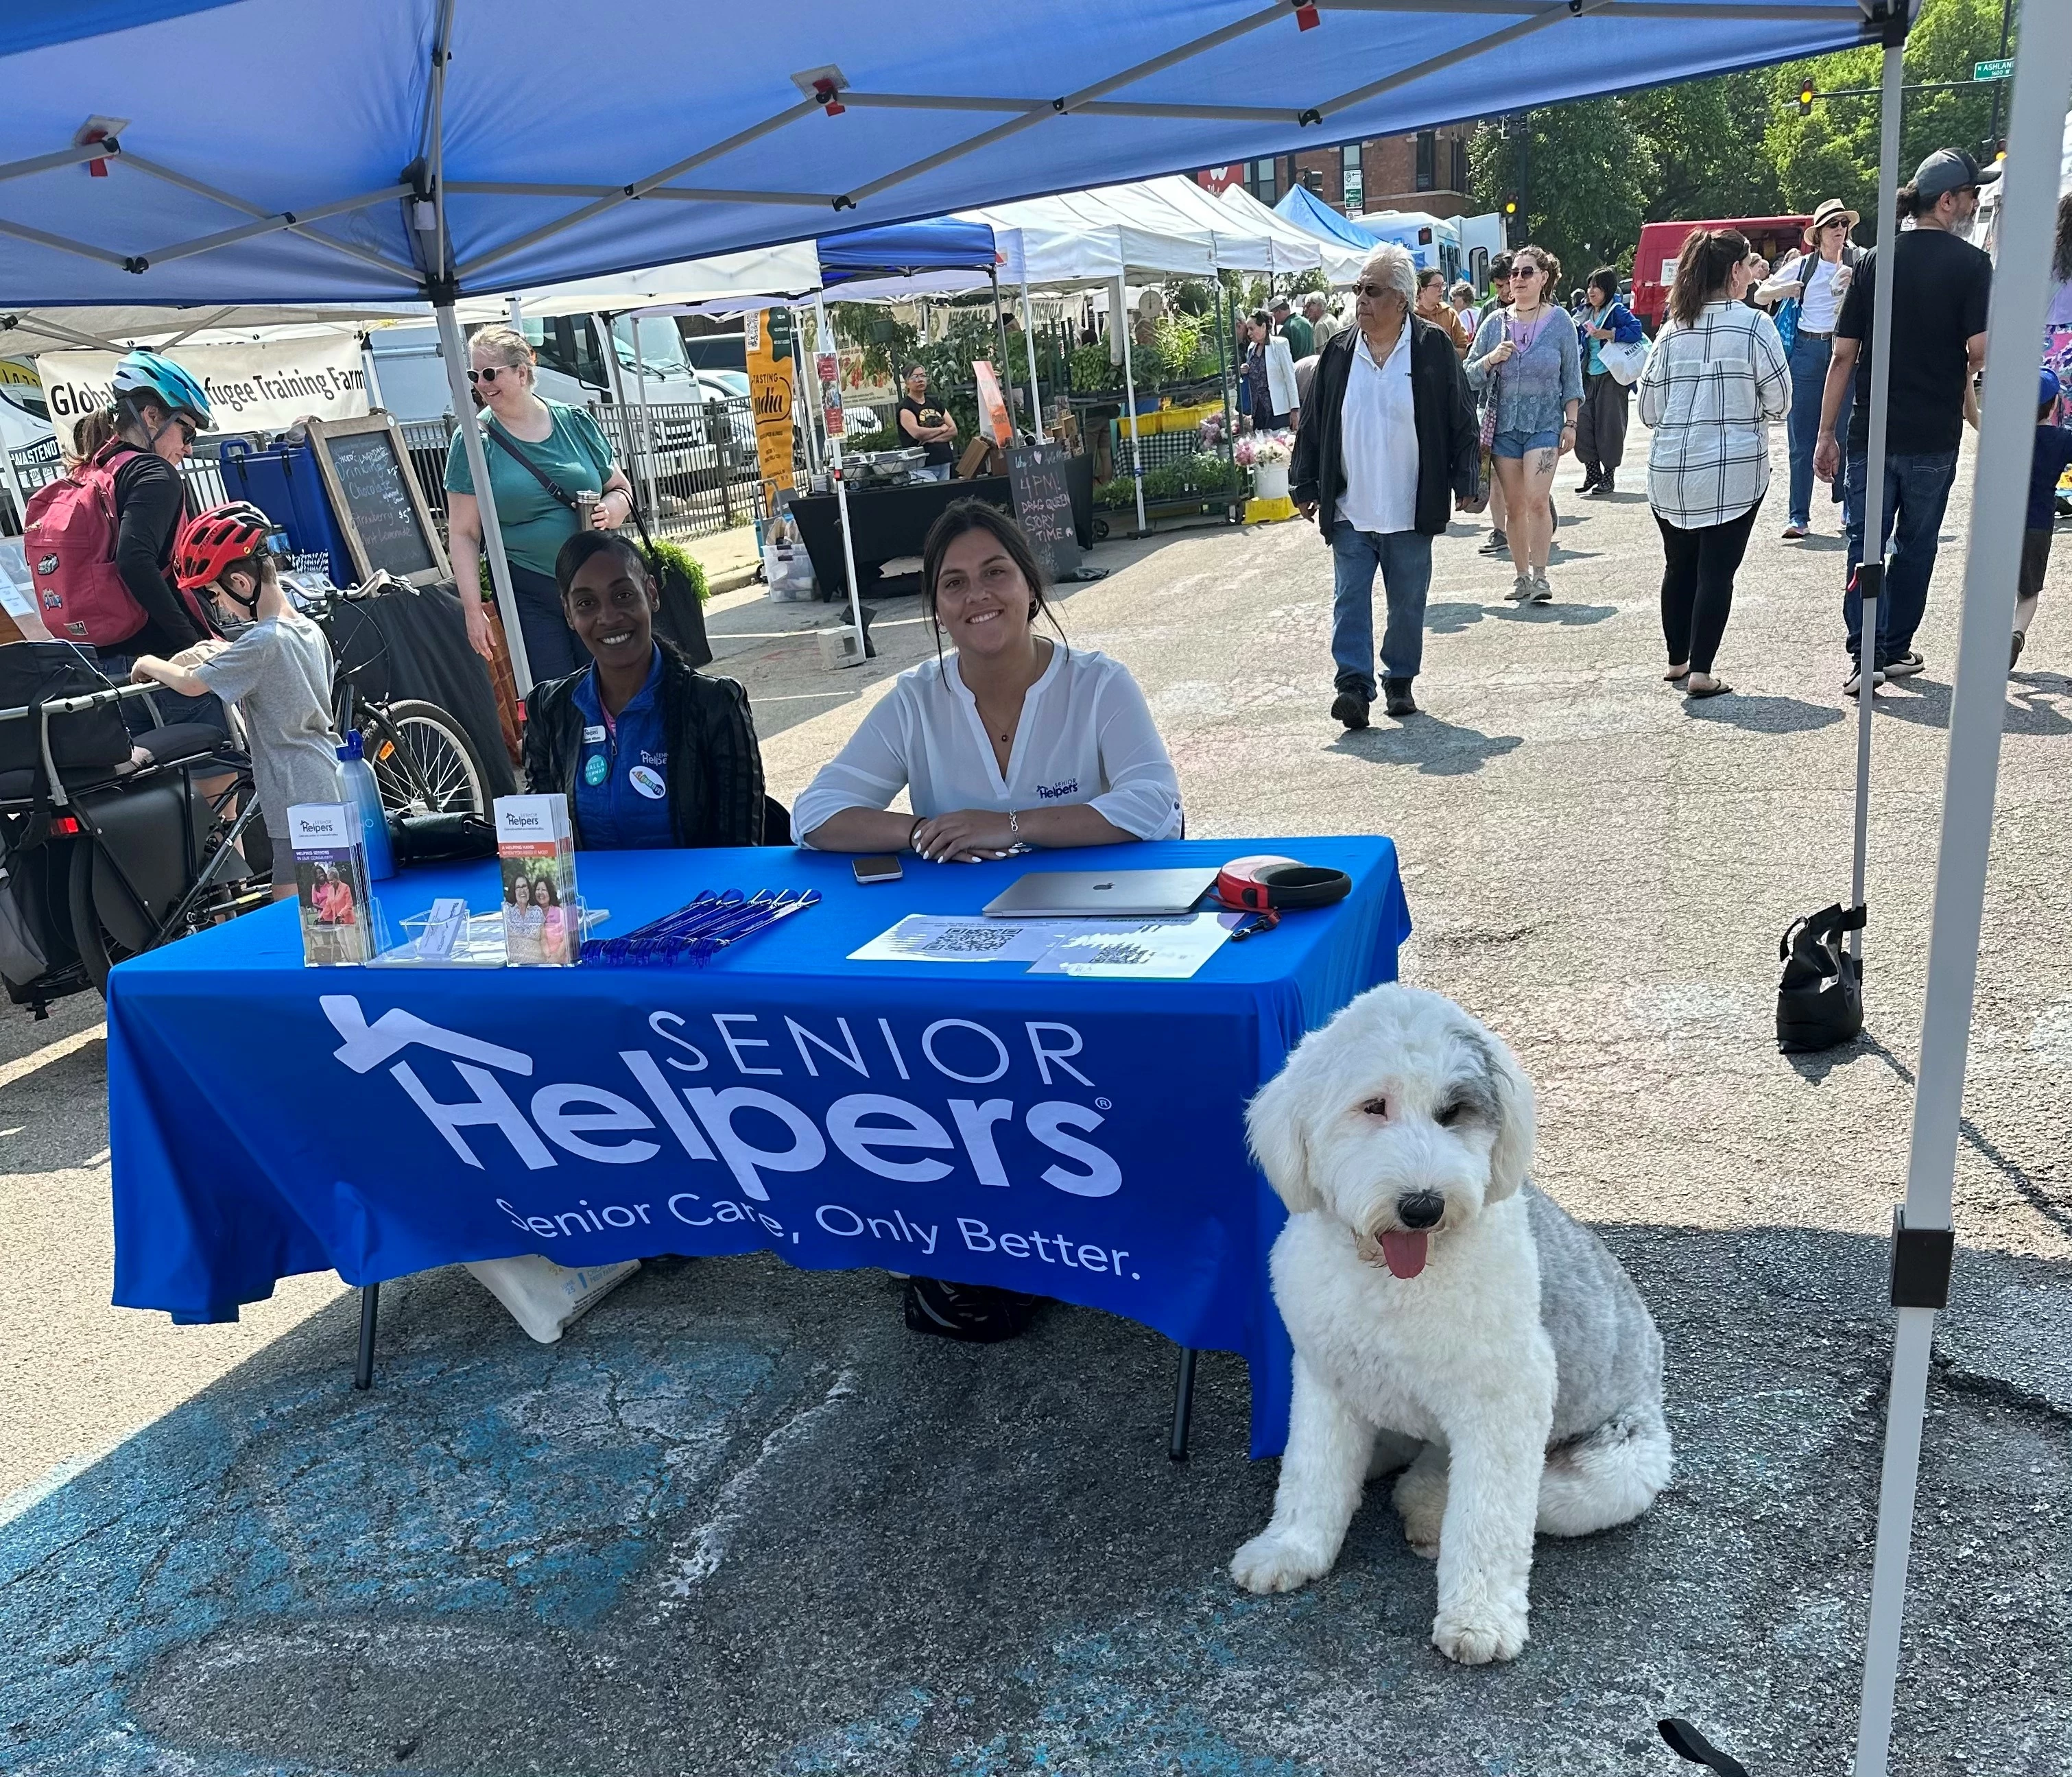 We had so much fun at the Andersonville farmers market yesterday! Andersonville is filled with a very welcoming community and makes networking experiences fun. We are so grateful to have met such amazing people and hope to be back at the farmers market soon!